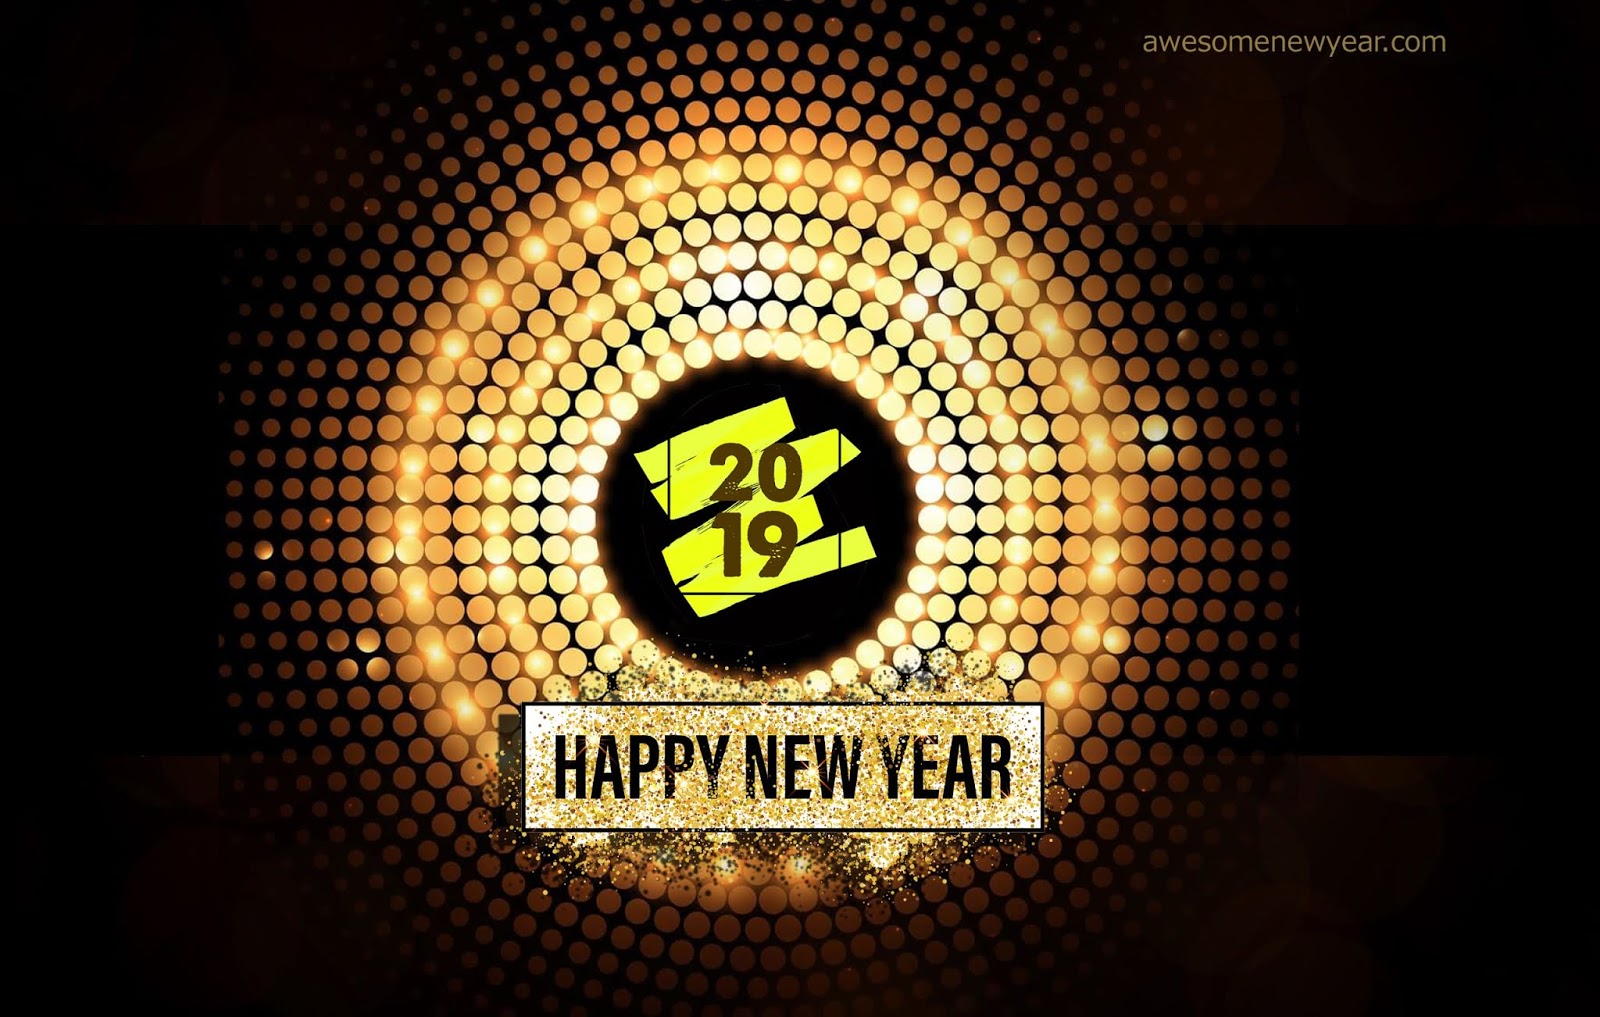 Happy New Year 2019 Images hd